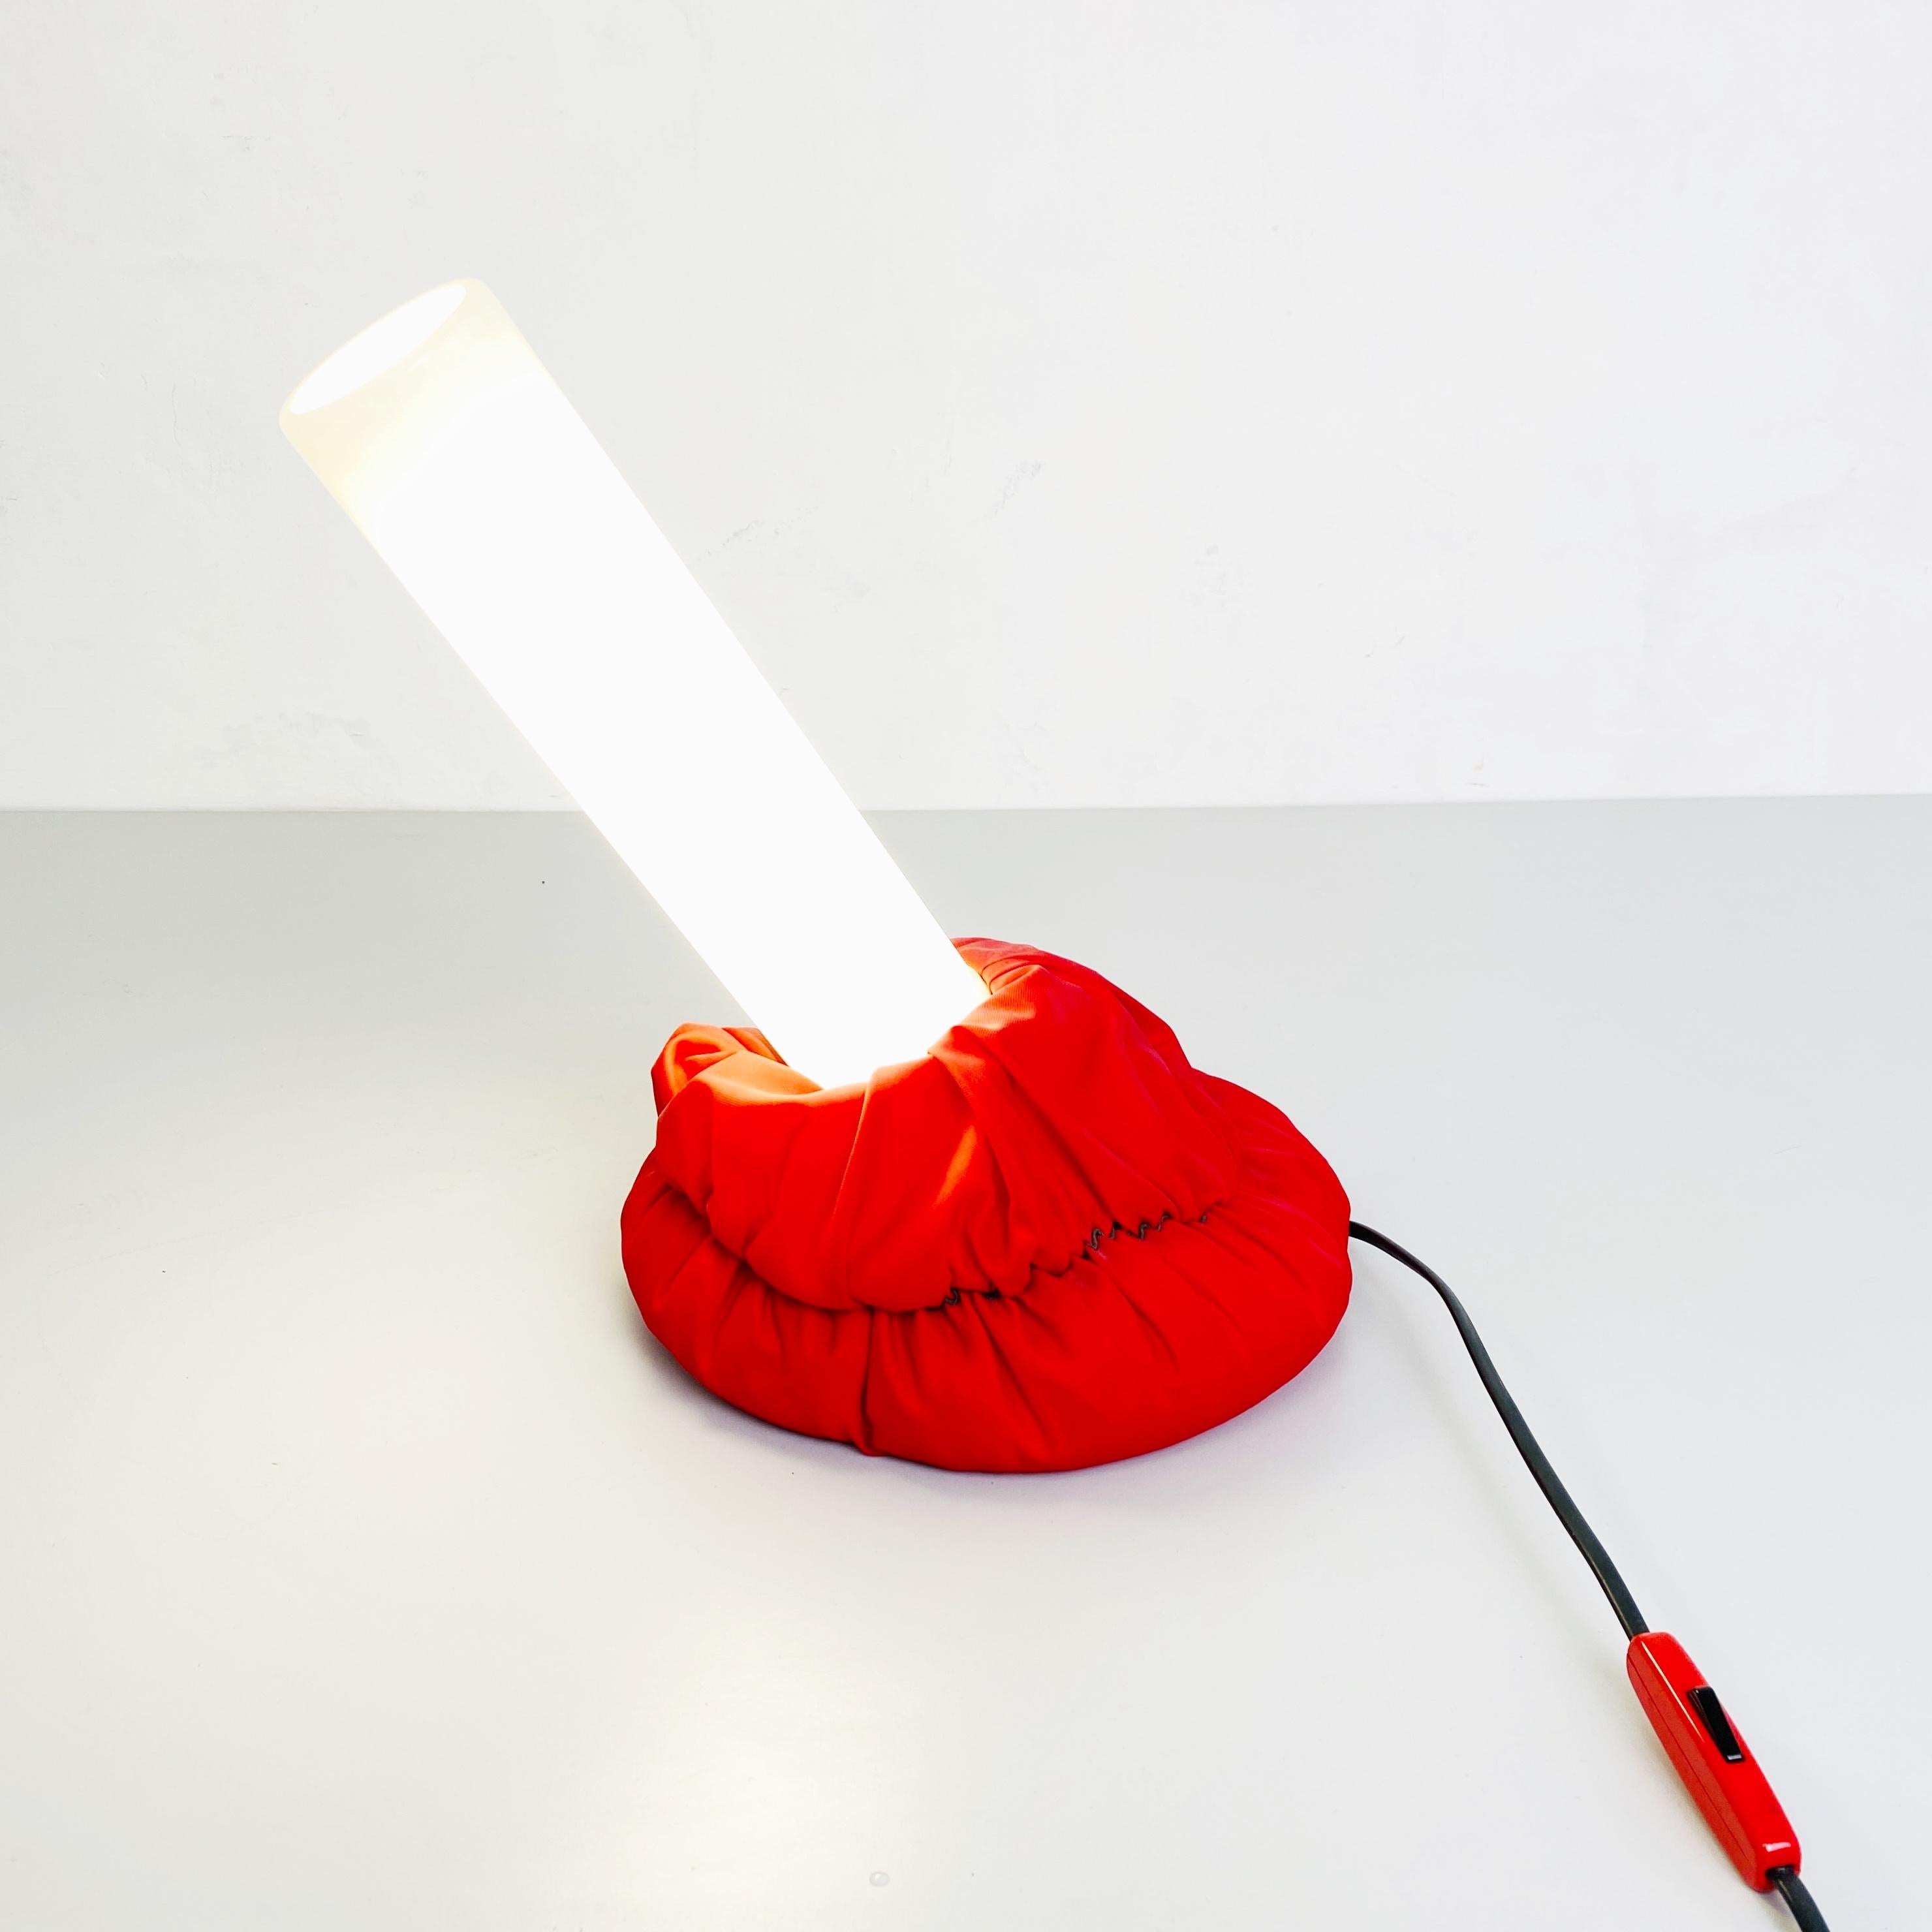 Late 20th Century Italian Table Lamp Mod. Cloche by De Pas, D'urbino and Lomazzi for Sirrah, 1982 For Sale